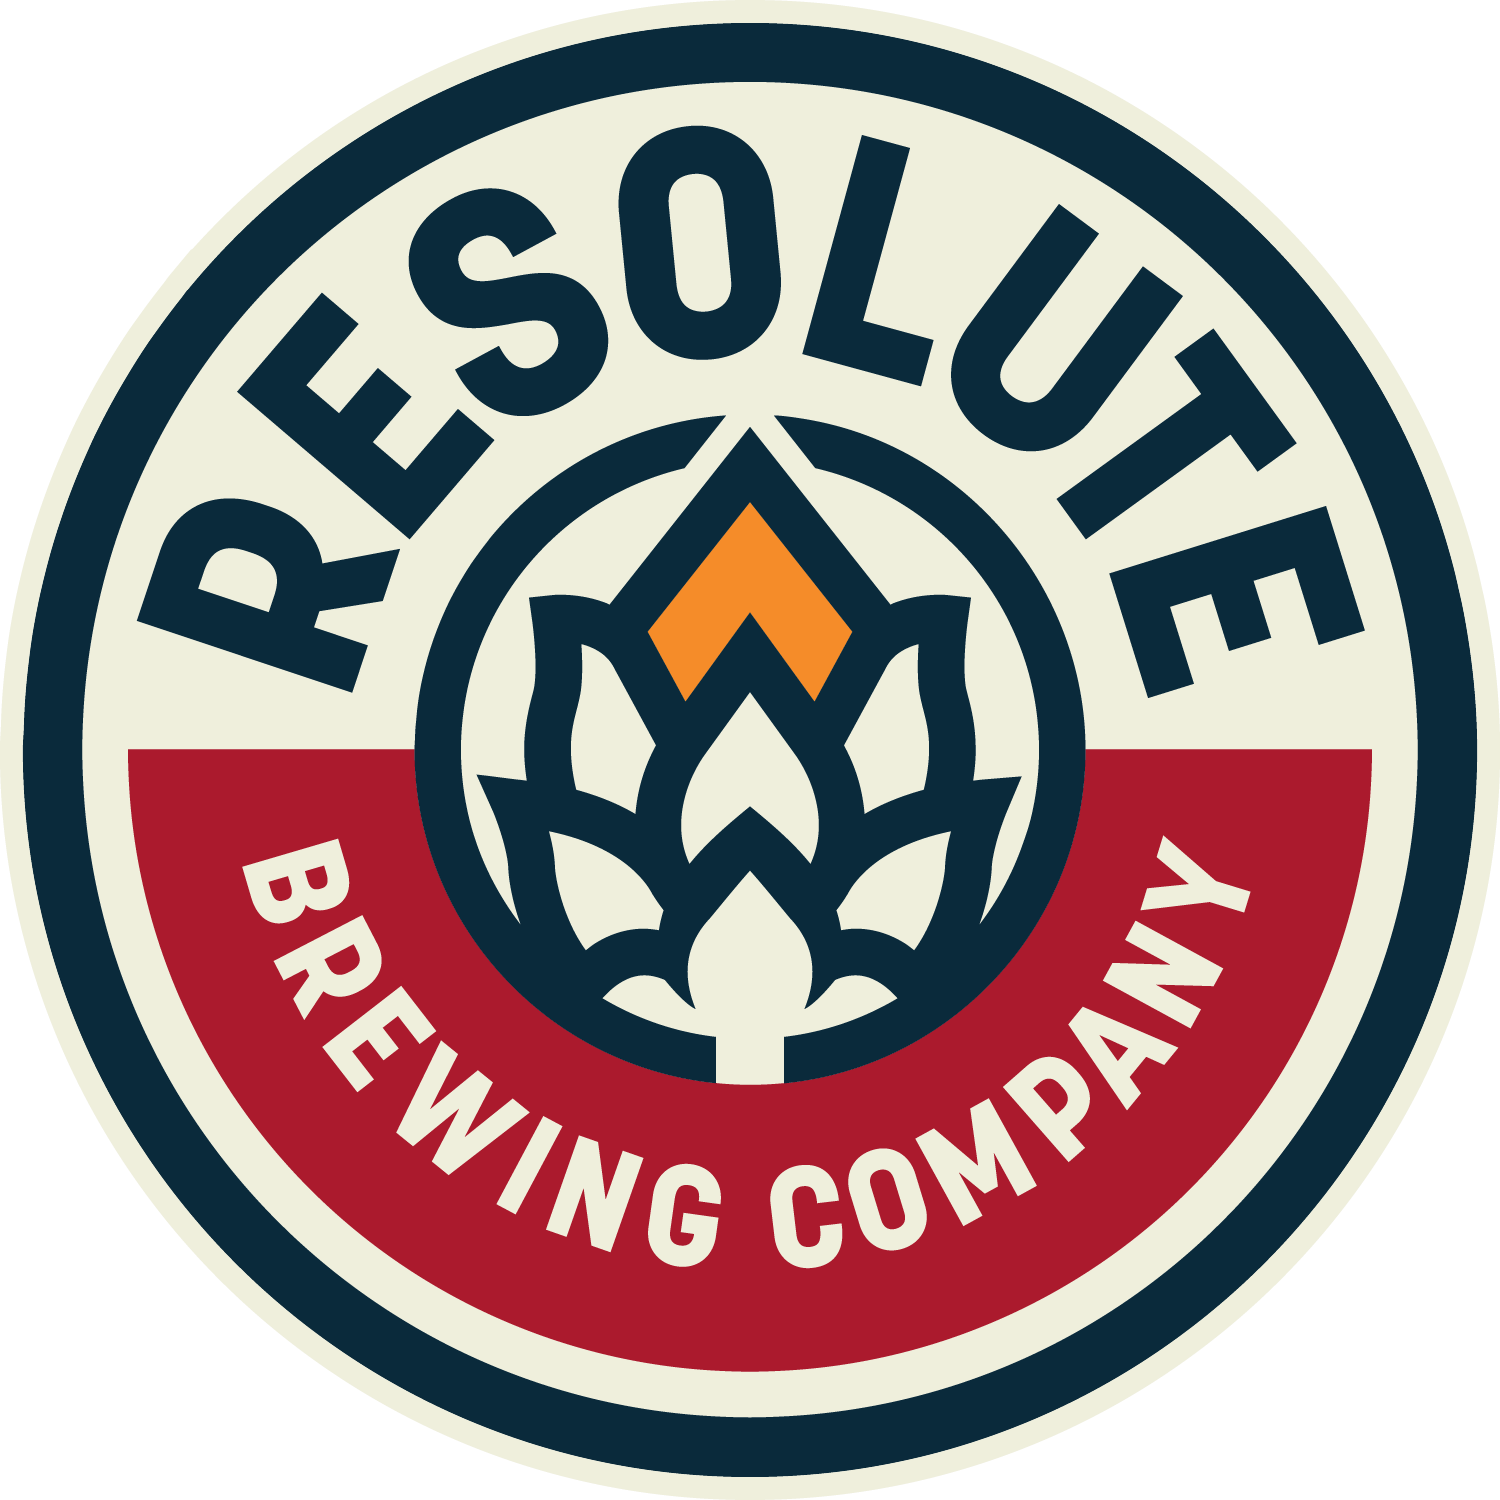 Resolute Brewing Co